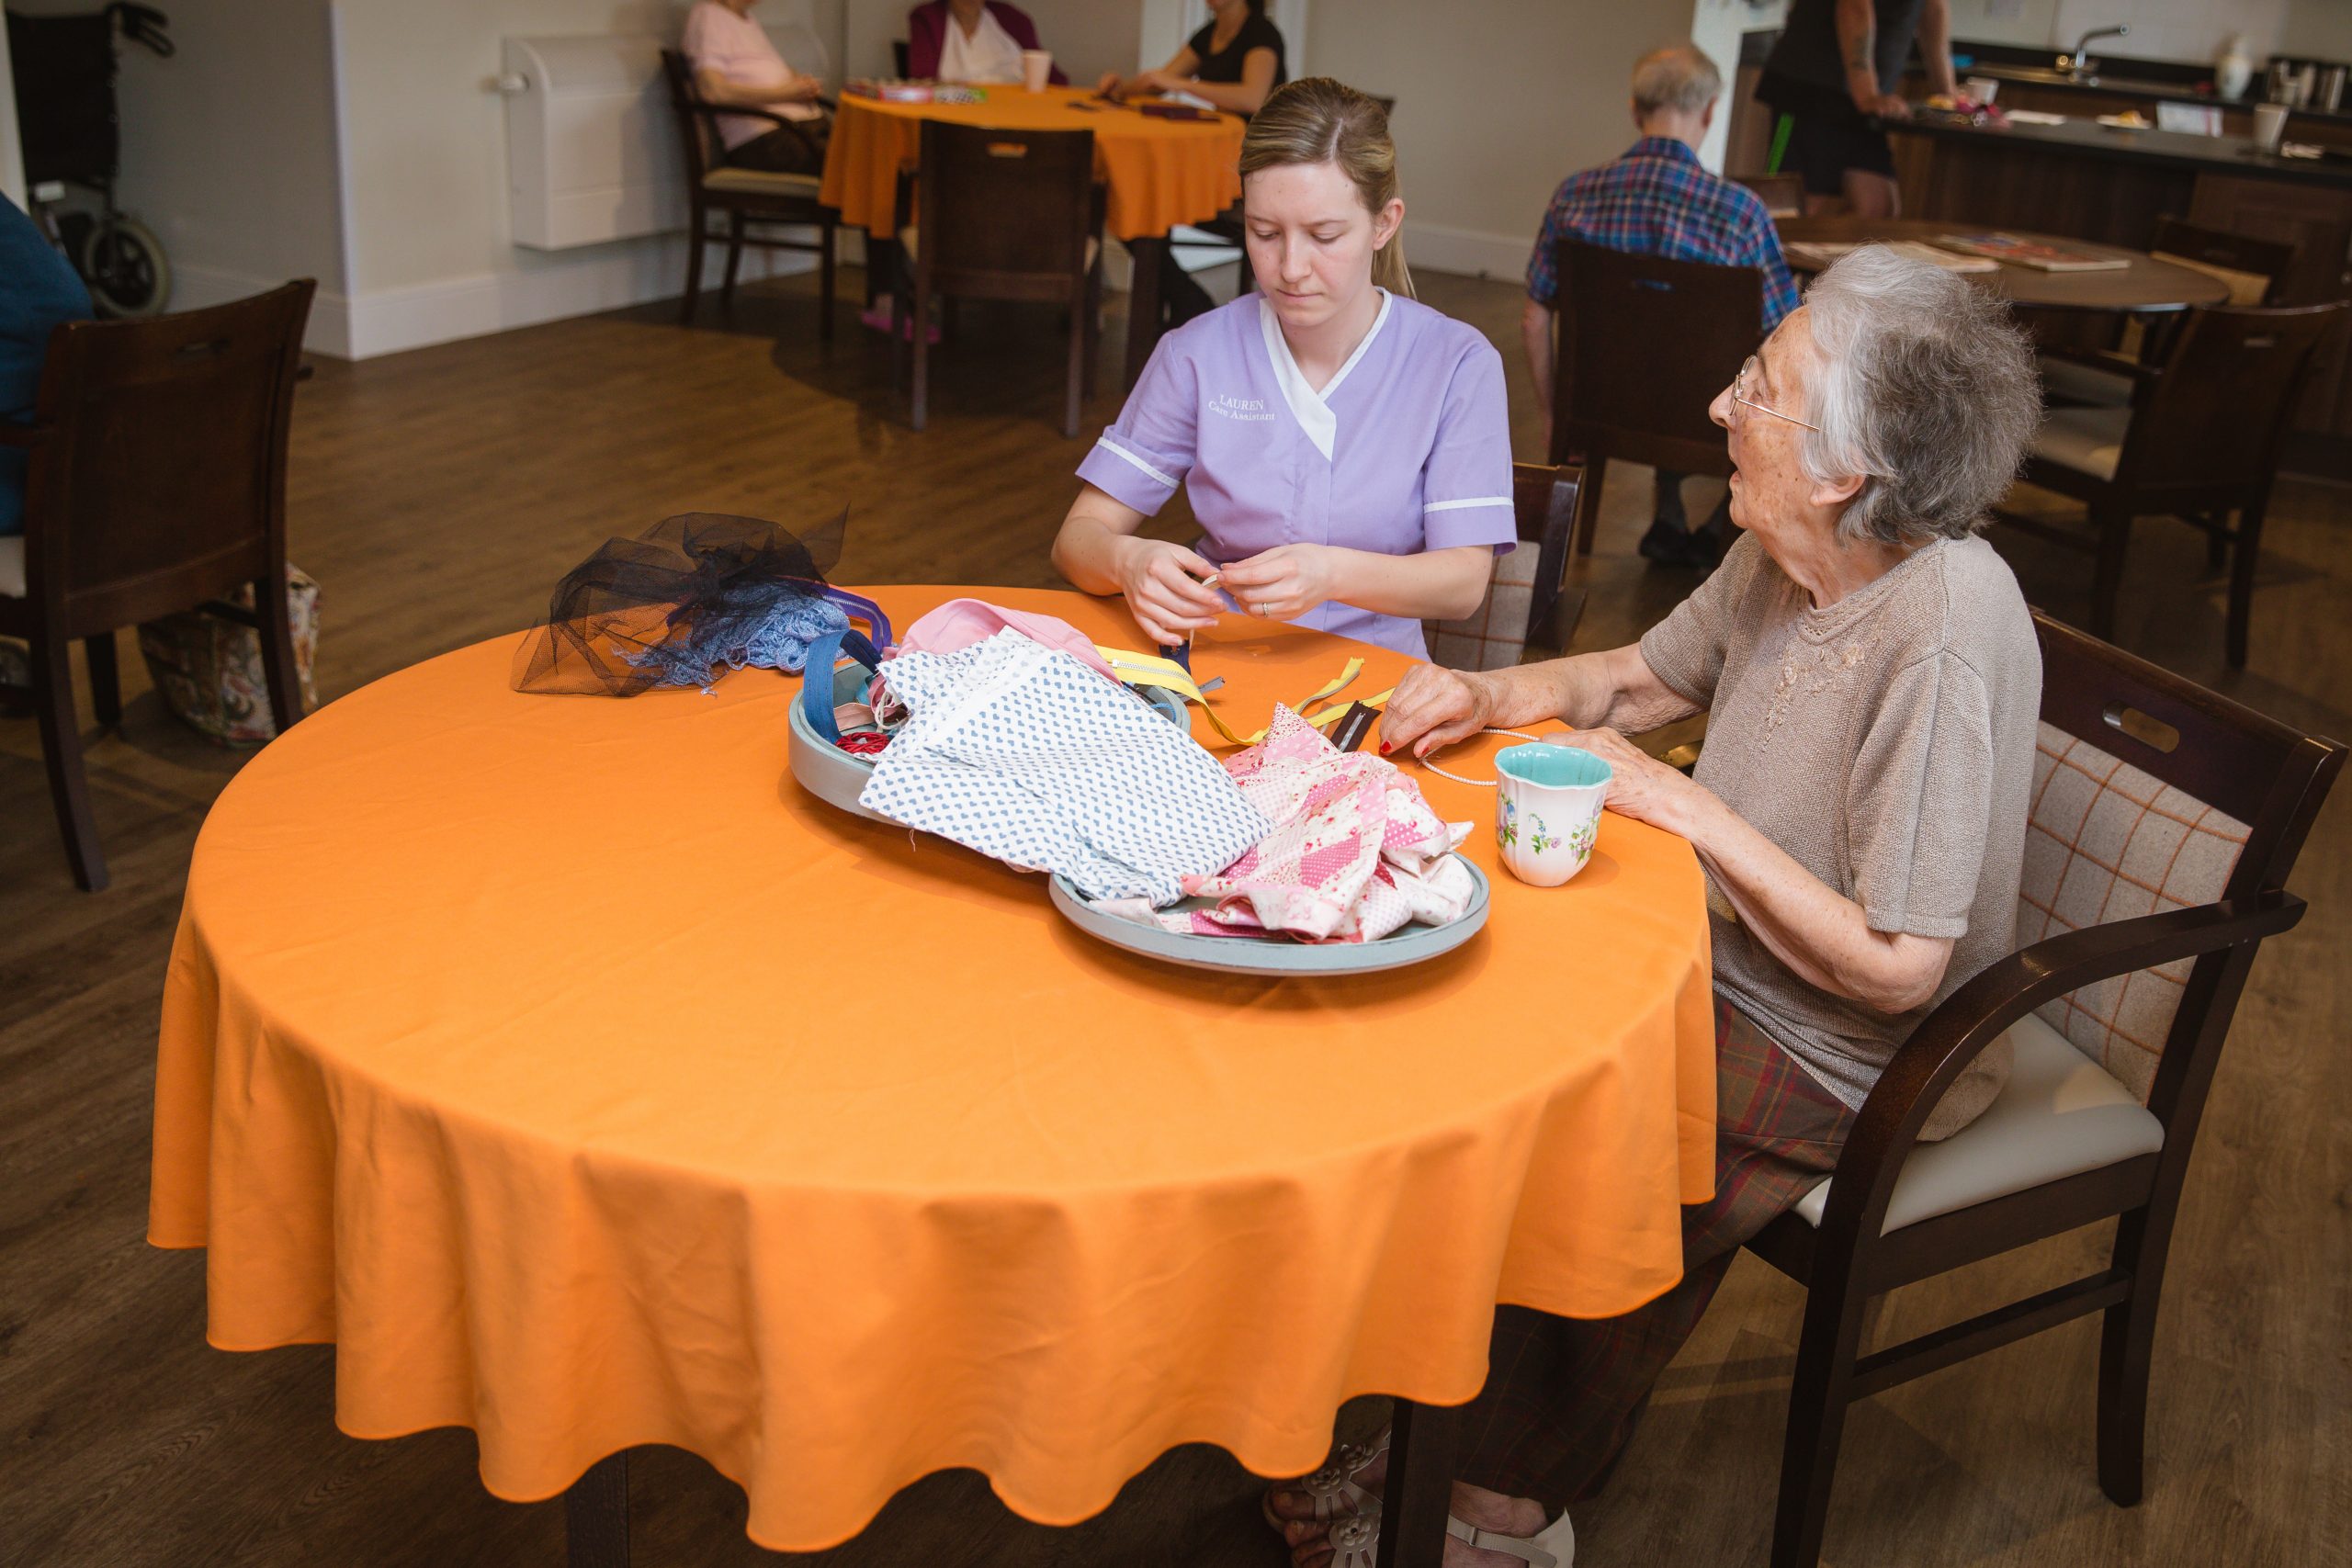 A resident enjoying some arts and crafts on a orange covered table with a female carer wearing purple uniform.